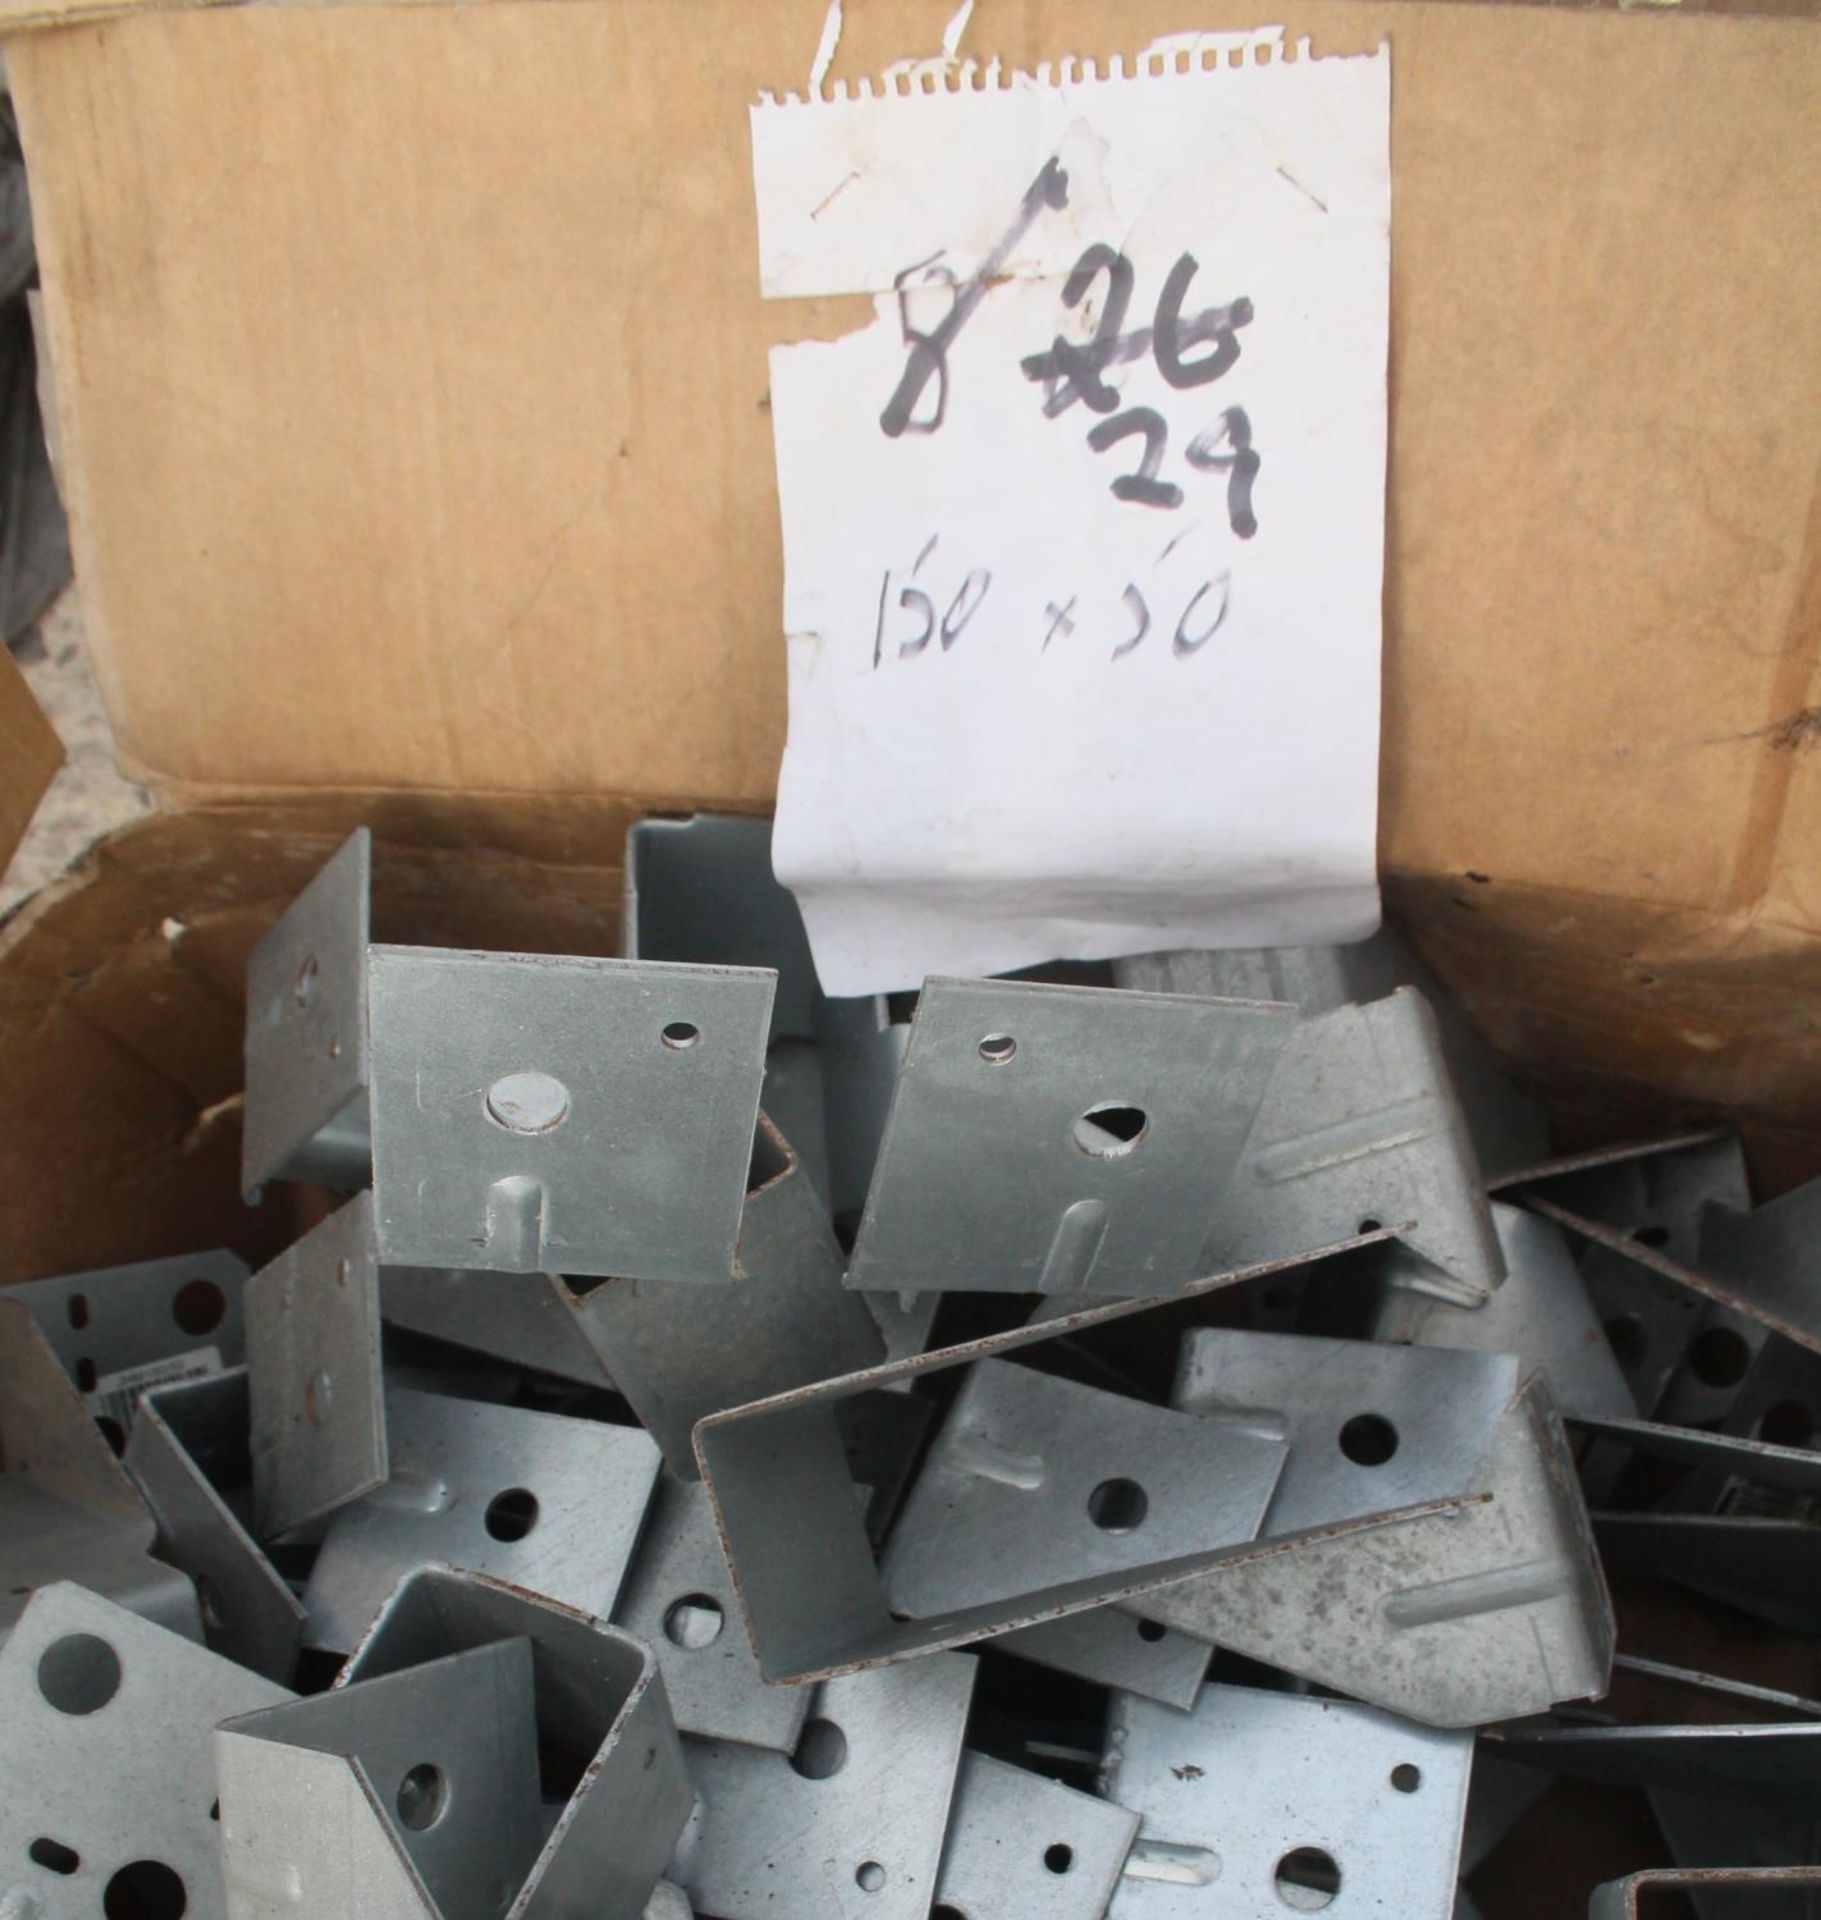 3 BOXES OF JOIST HANGERS (72) VARIOUS SIZES + VAT - Image 5 of 6